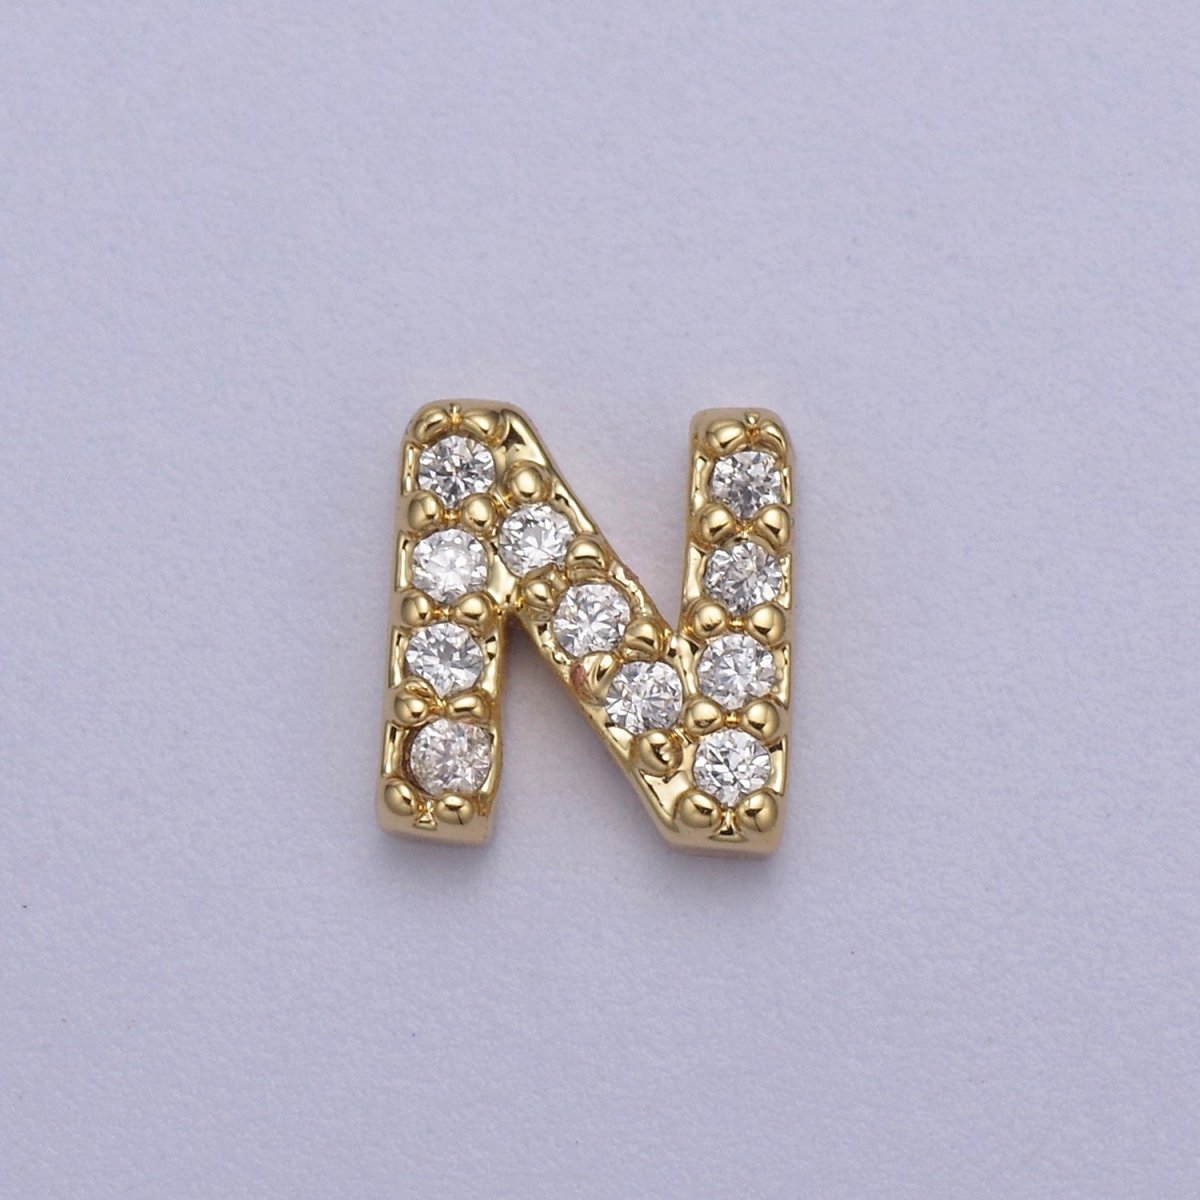 Special New Collection 14K Gold Filled Initial Beads For Personalized Locket Jewelry Making W-122 - W-147 N-580 N-581 - DLUXCA